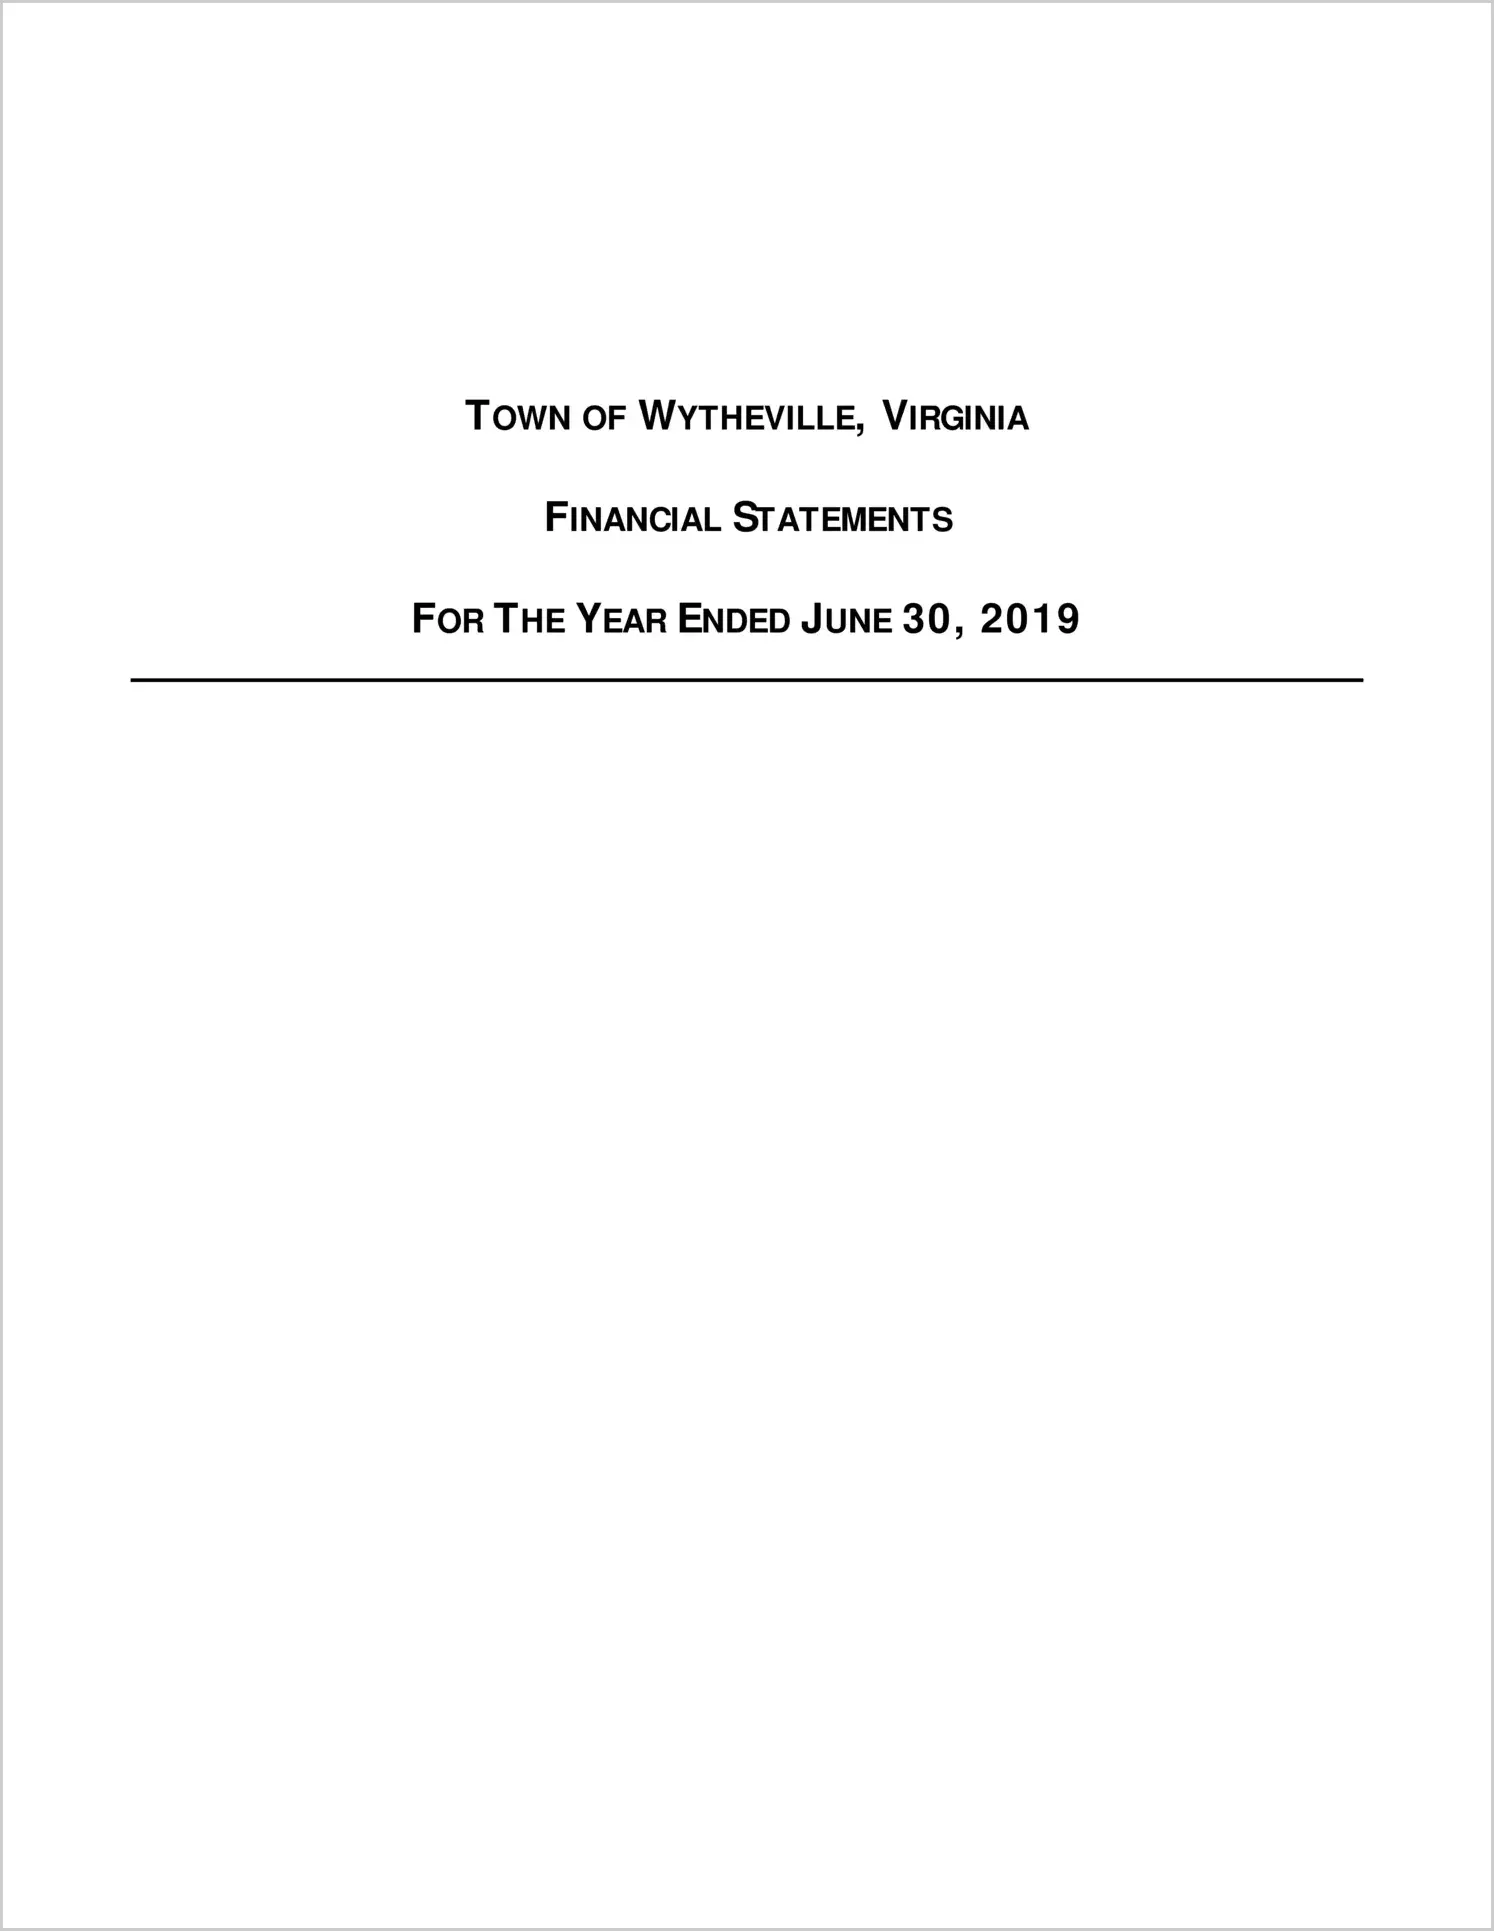 2019 Annual Financial Report for Town of Wytheville